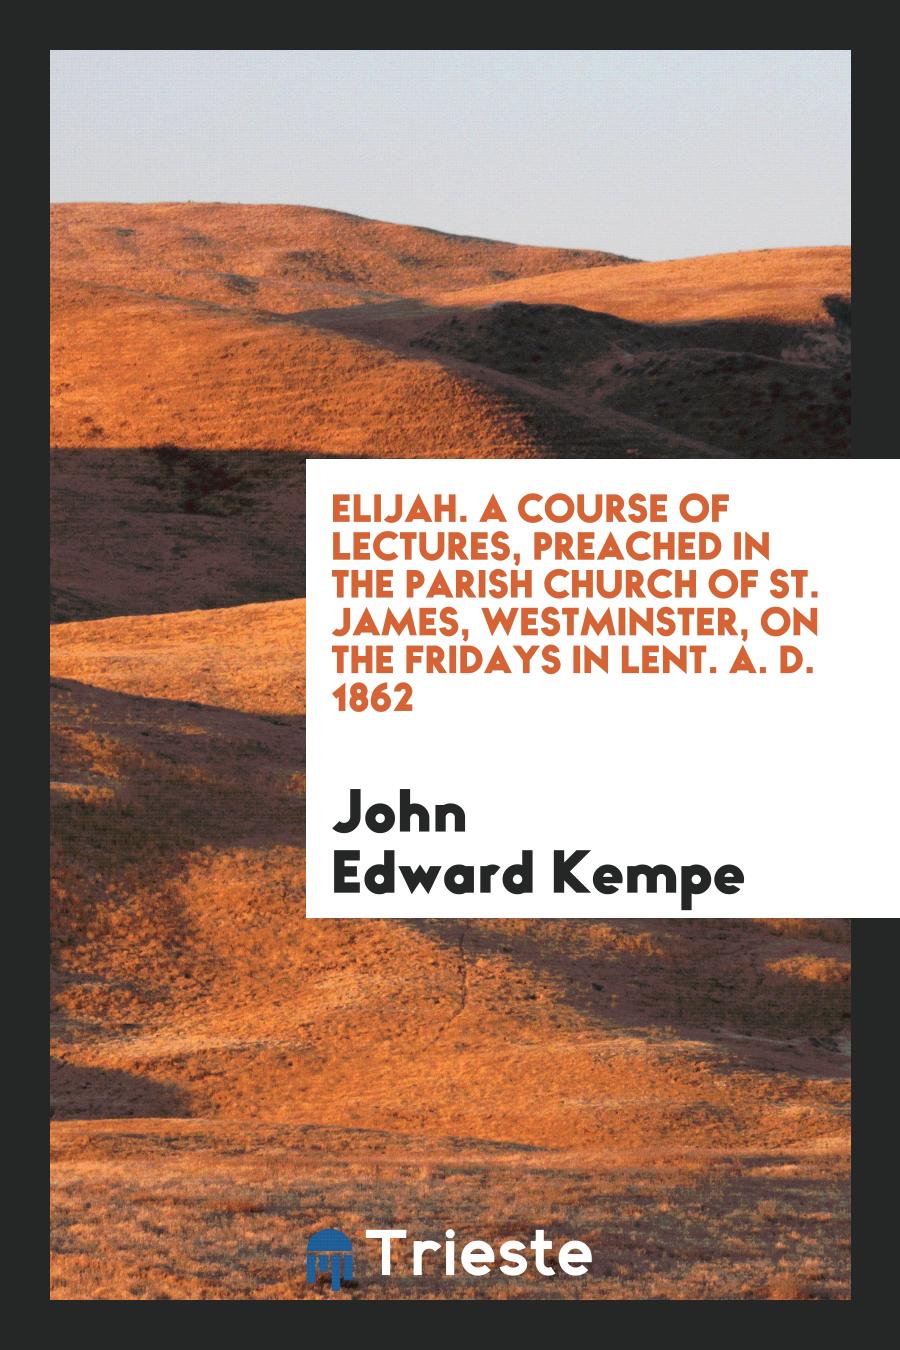 Elijah. A Course of Lectures, Preached in the Parish Church of St. James, Westminster, on the Fridays in Lent. A. D. 1862